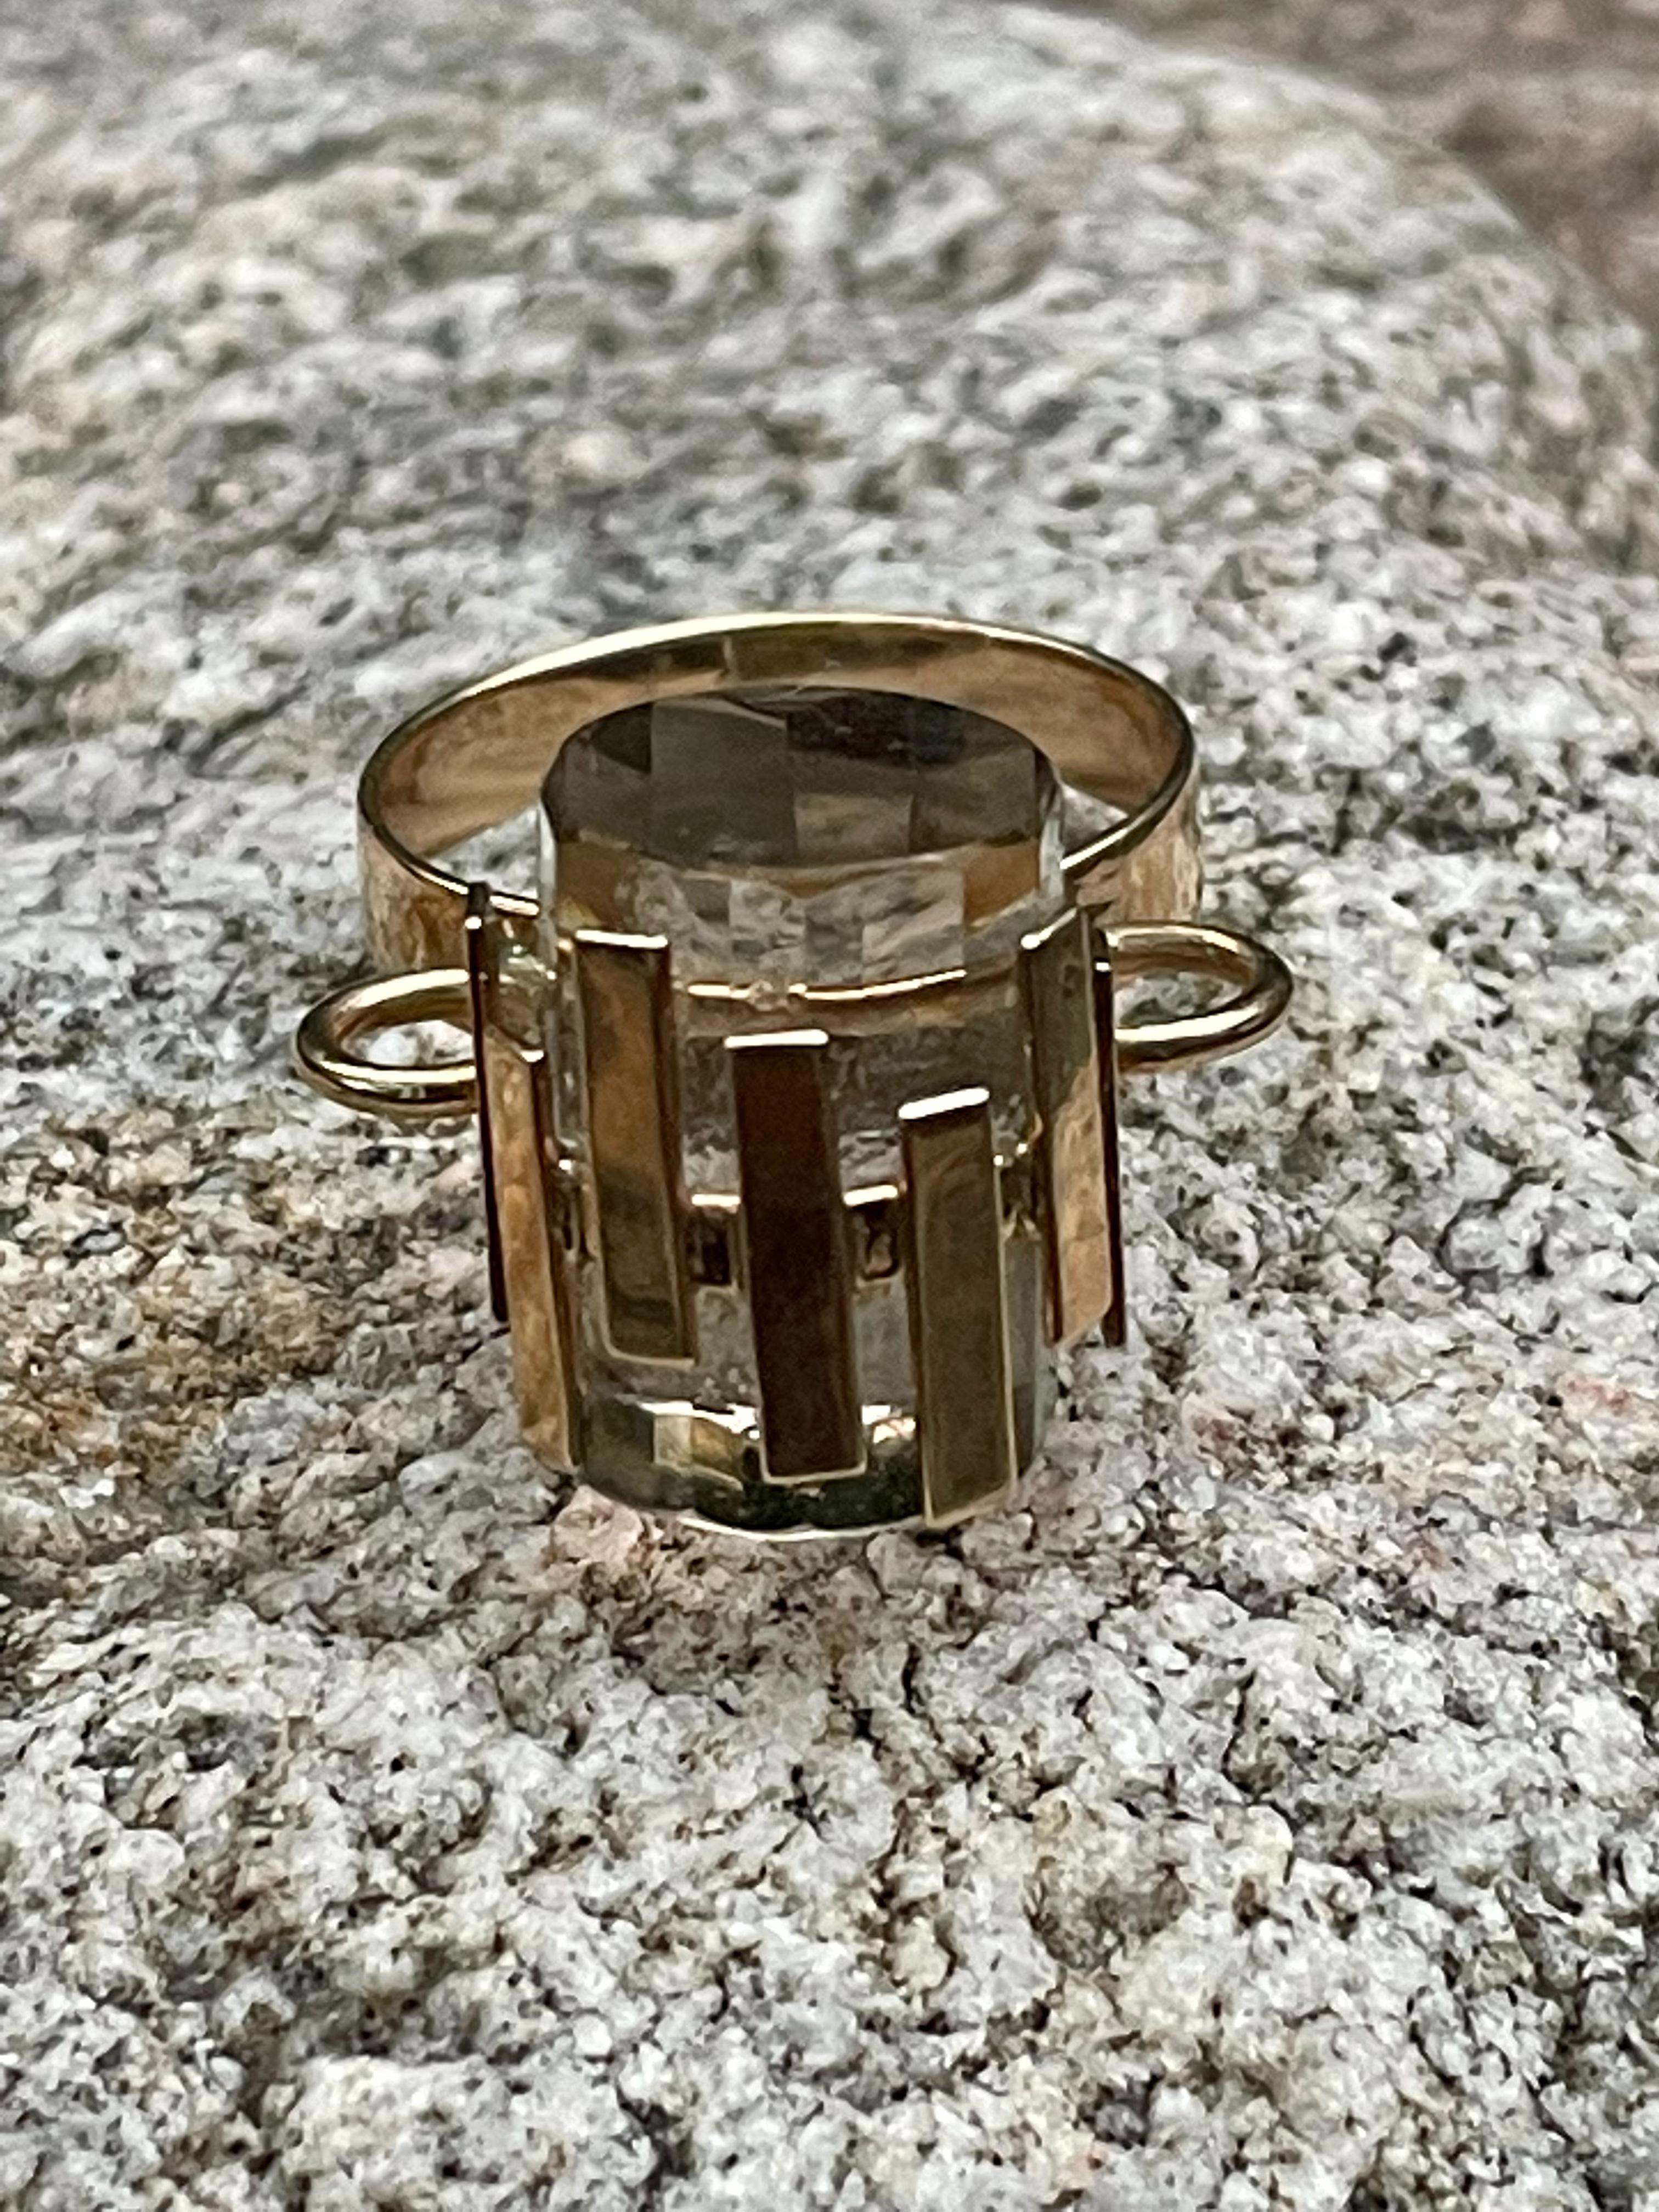 This unique fashion ring features a tube-shaped Smoky Quartz which measures 15 x 11mm.  It is mounted with a ring of 14 karat yellow Gold planks holding it in place and making it rise above the wearer's finger.  It's so unique.

Size: 7
This ring